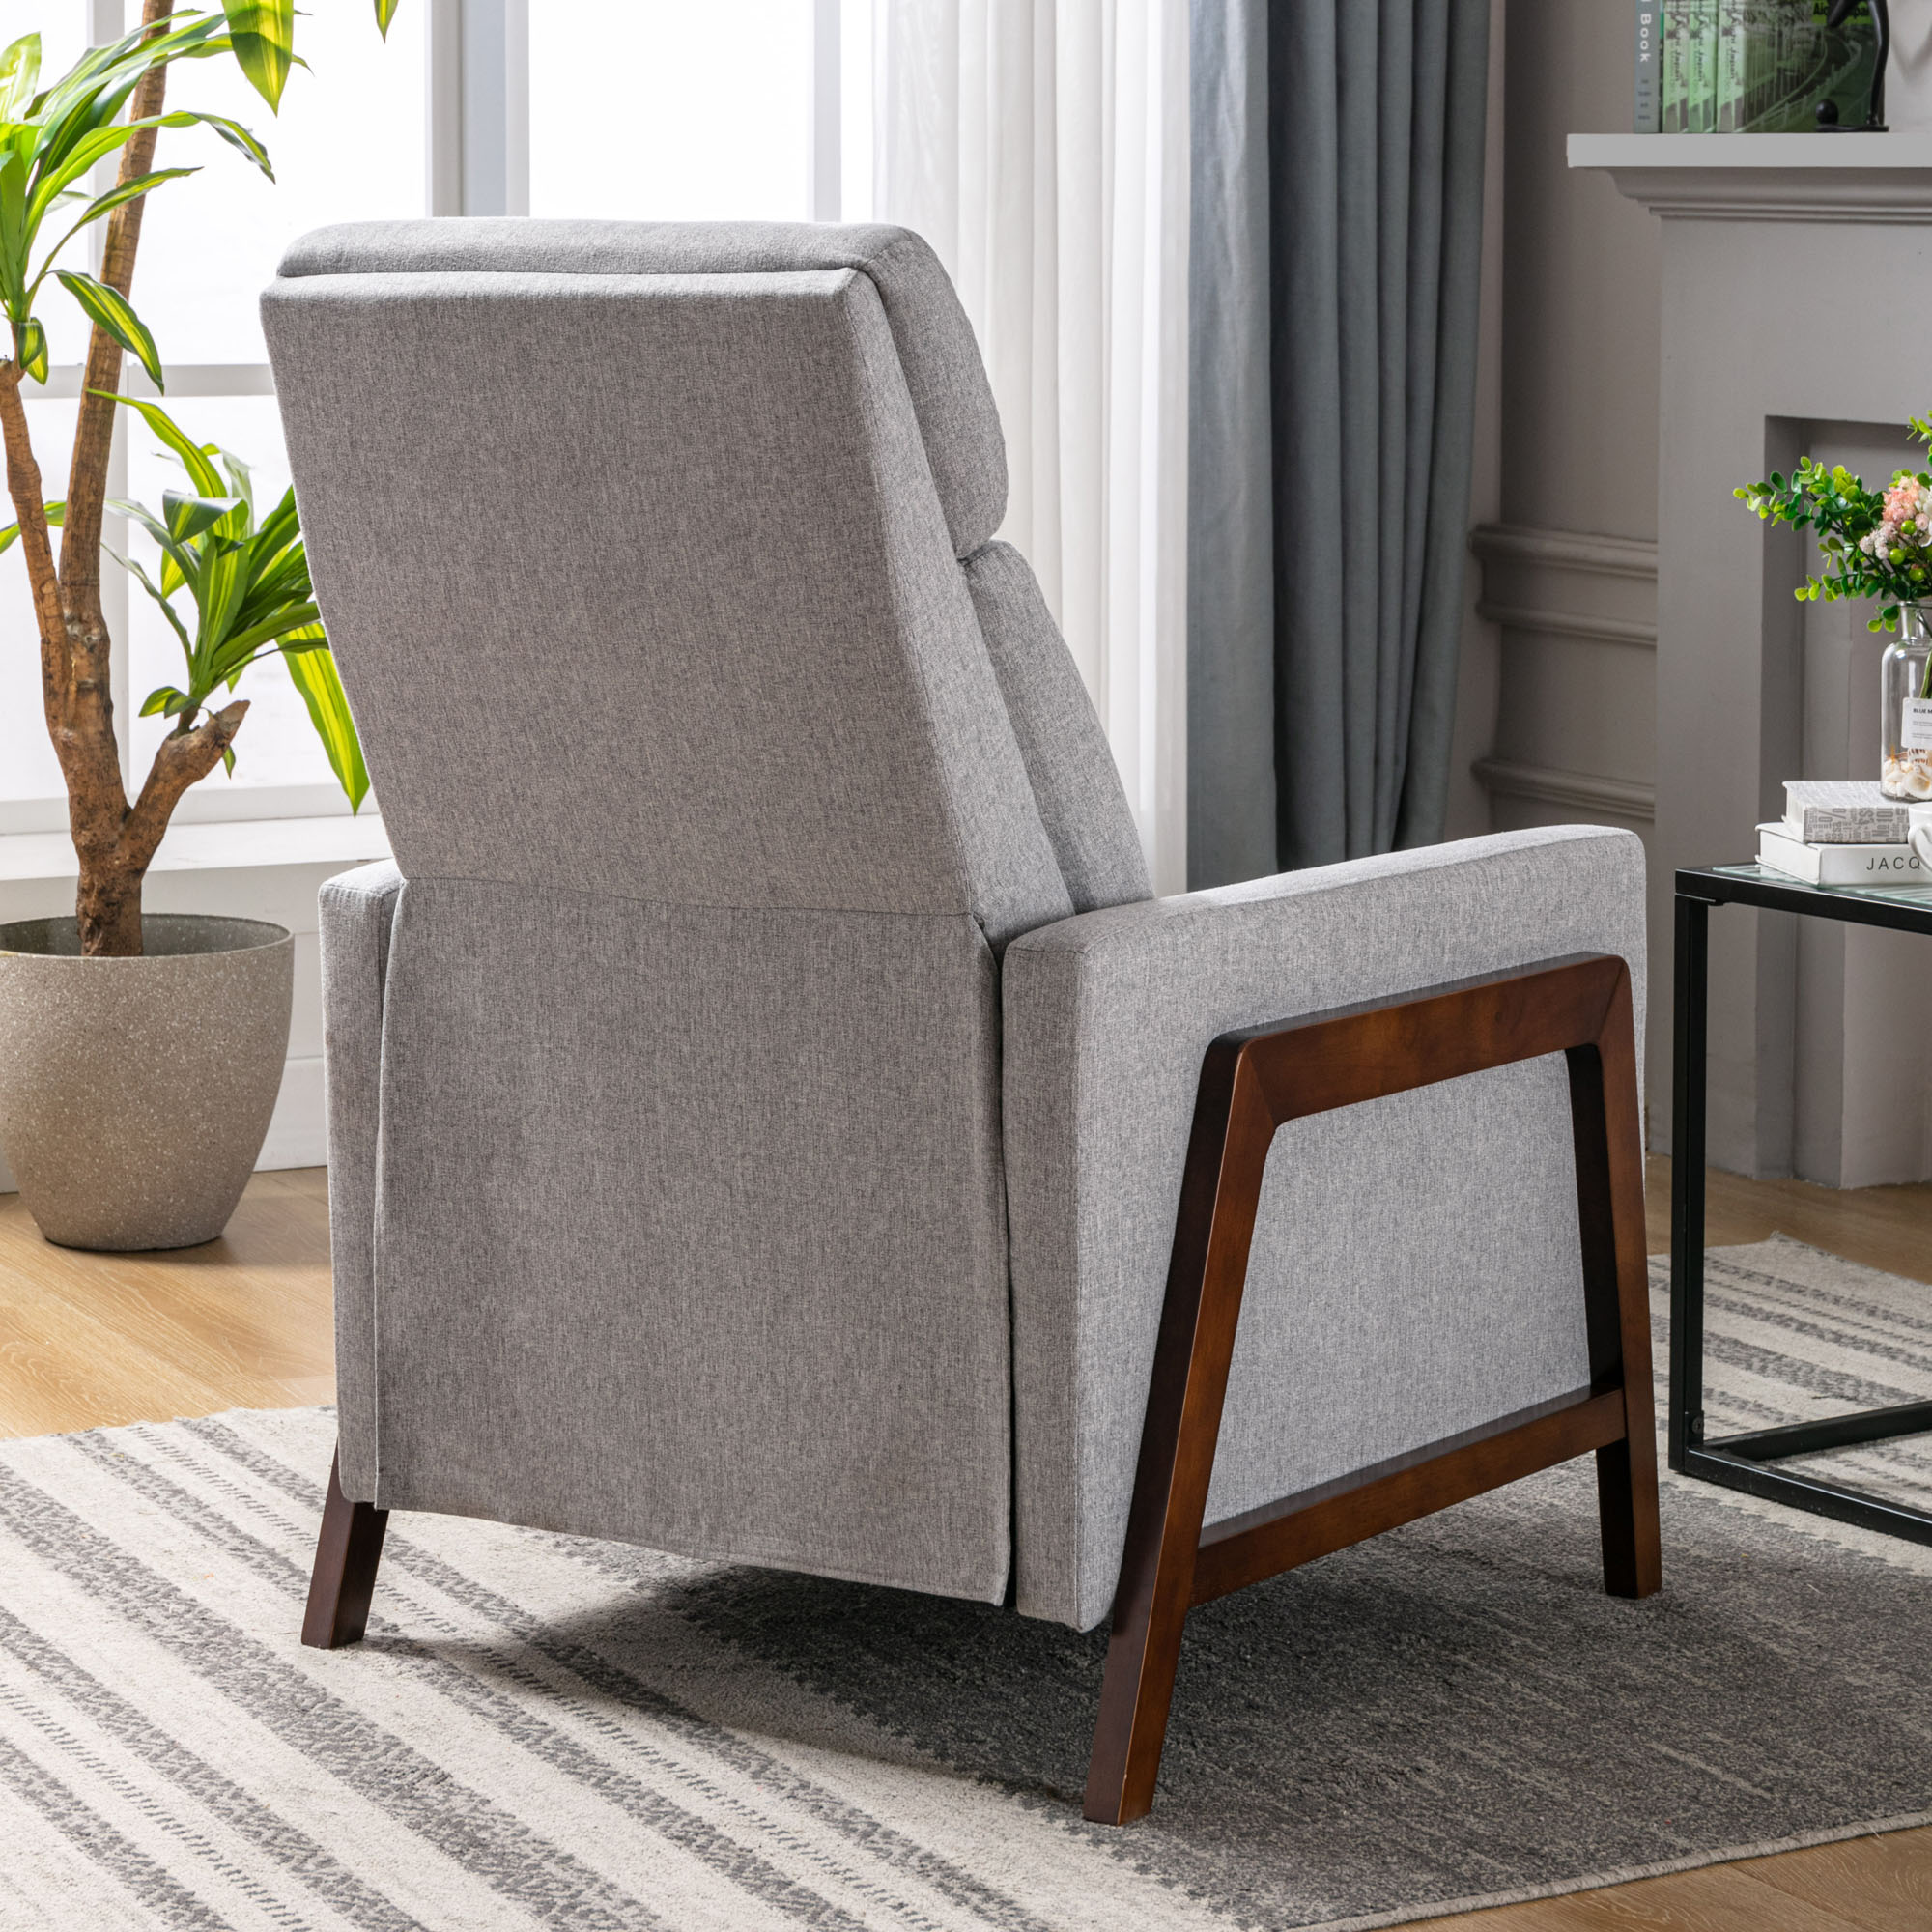 CASAINC Gray Polyester Upholstered Recliner at Lowes.com